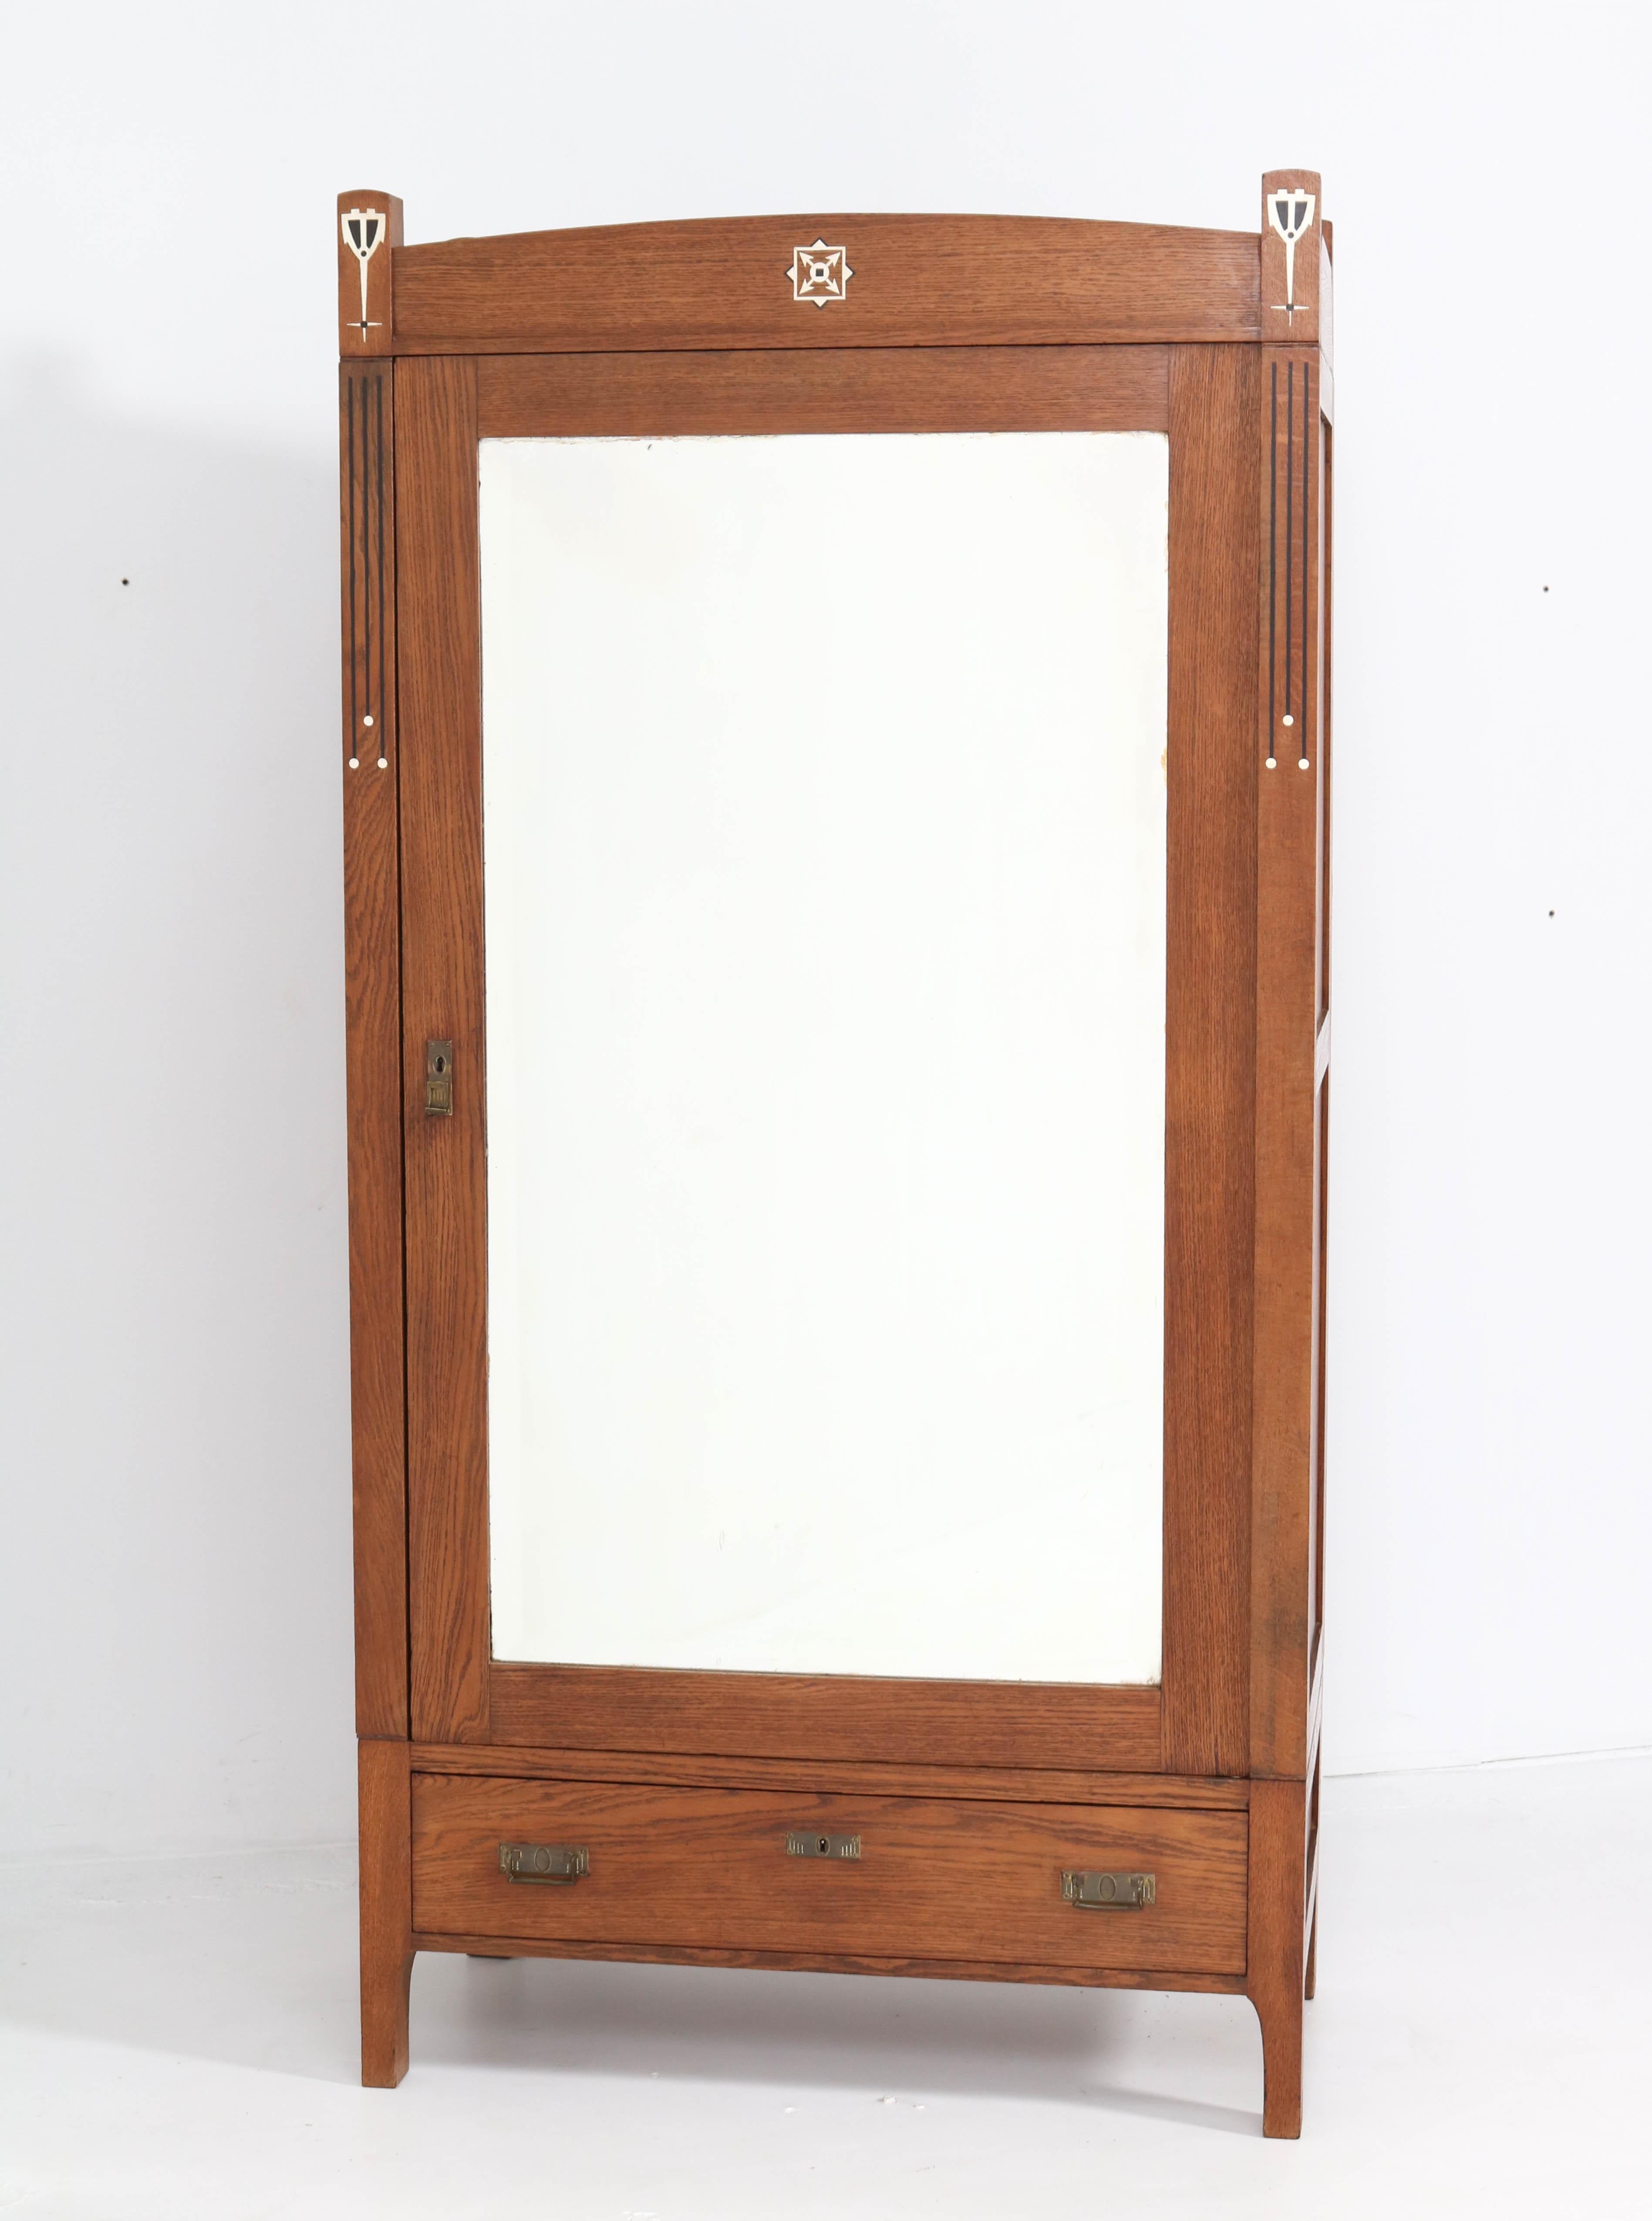 Magnificent and rare Arts & Crafts Art Nouveau armoire or wardrobe.
Striking Dutch design from the 1900s.
In the style of Onder den Sint Maarten.
Solid oak with original brass handles.
Original beveled glass mirror.
Four original wooden